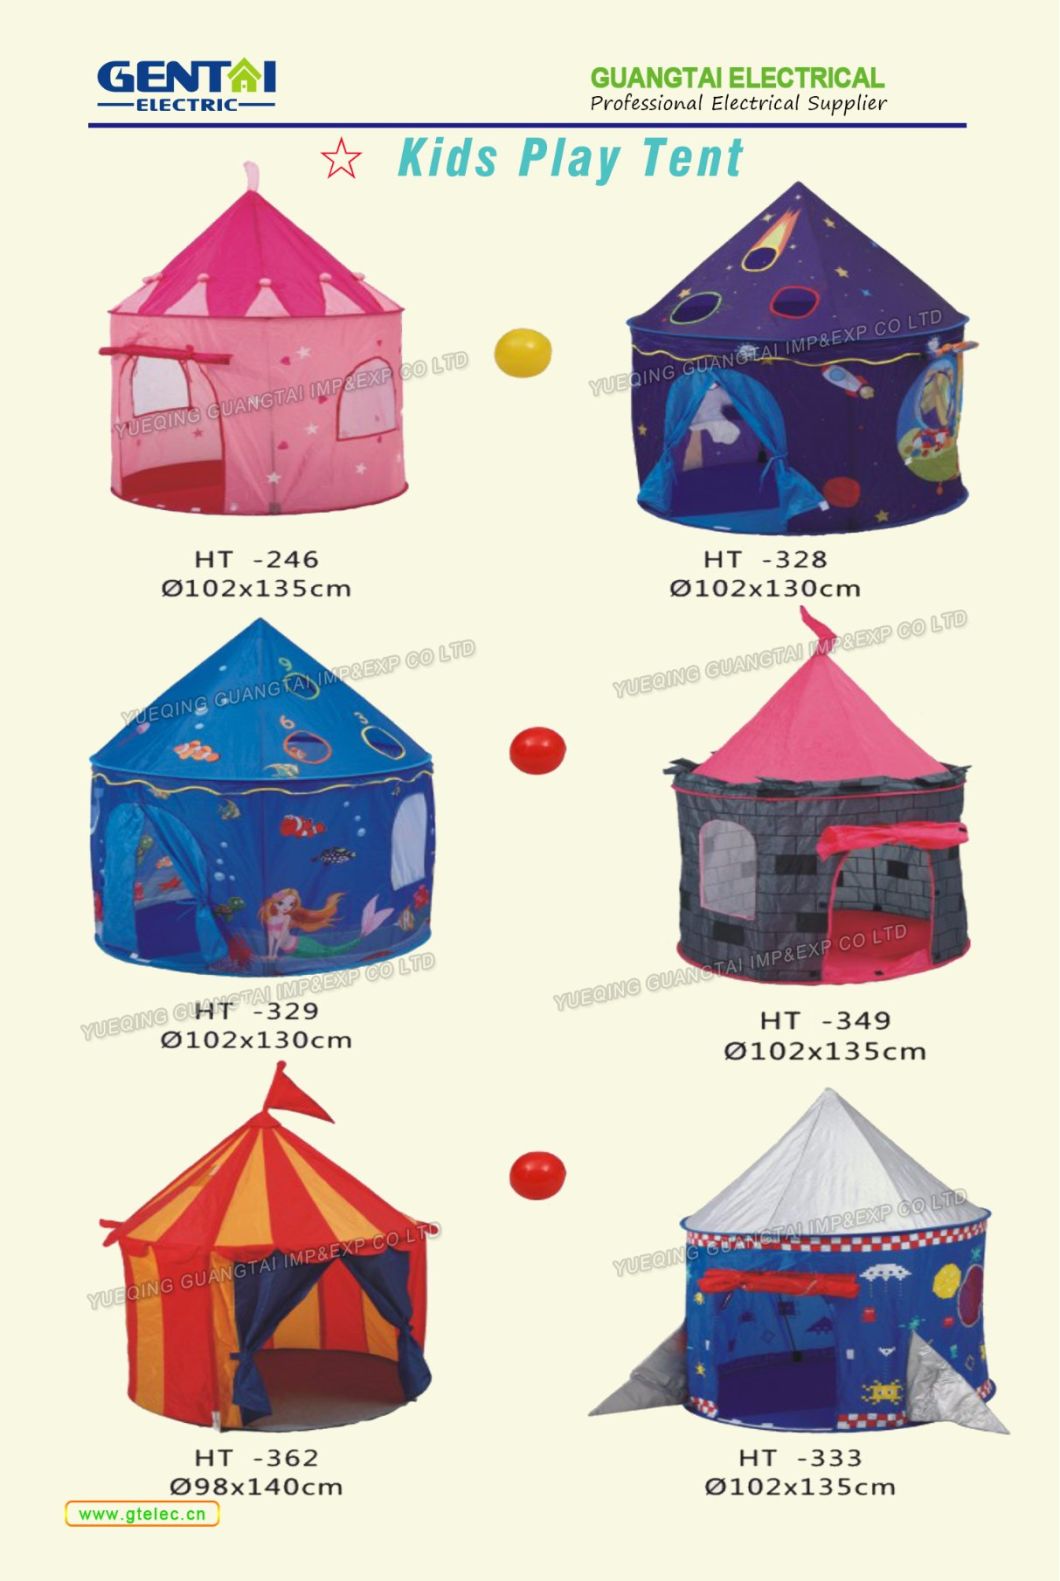 Hot Selling Kids Play Tent with Low Price